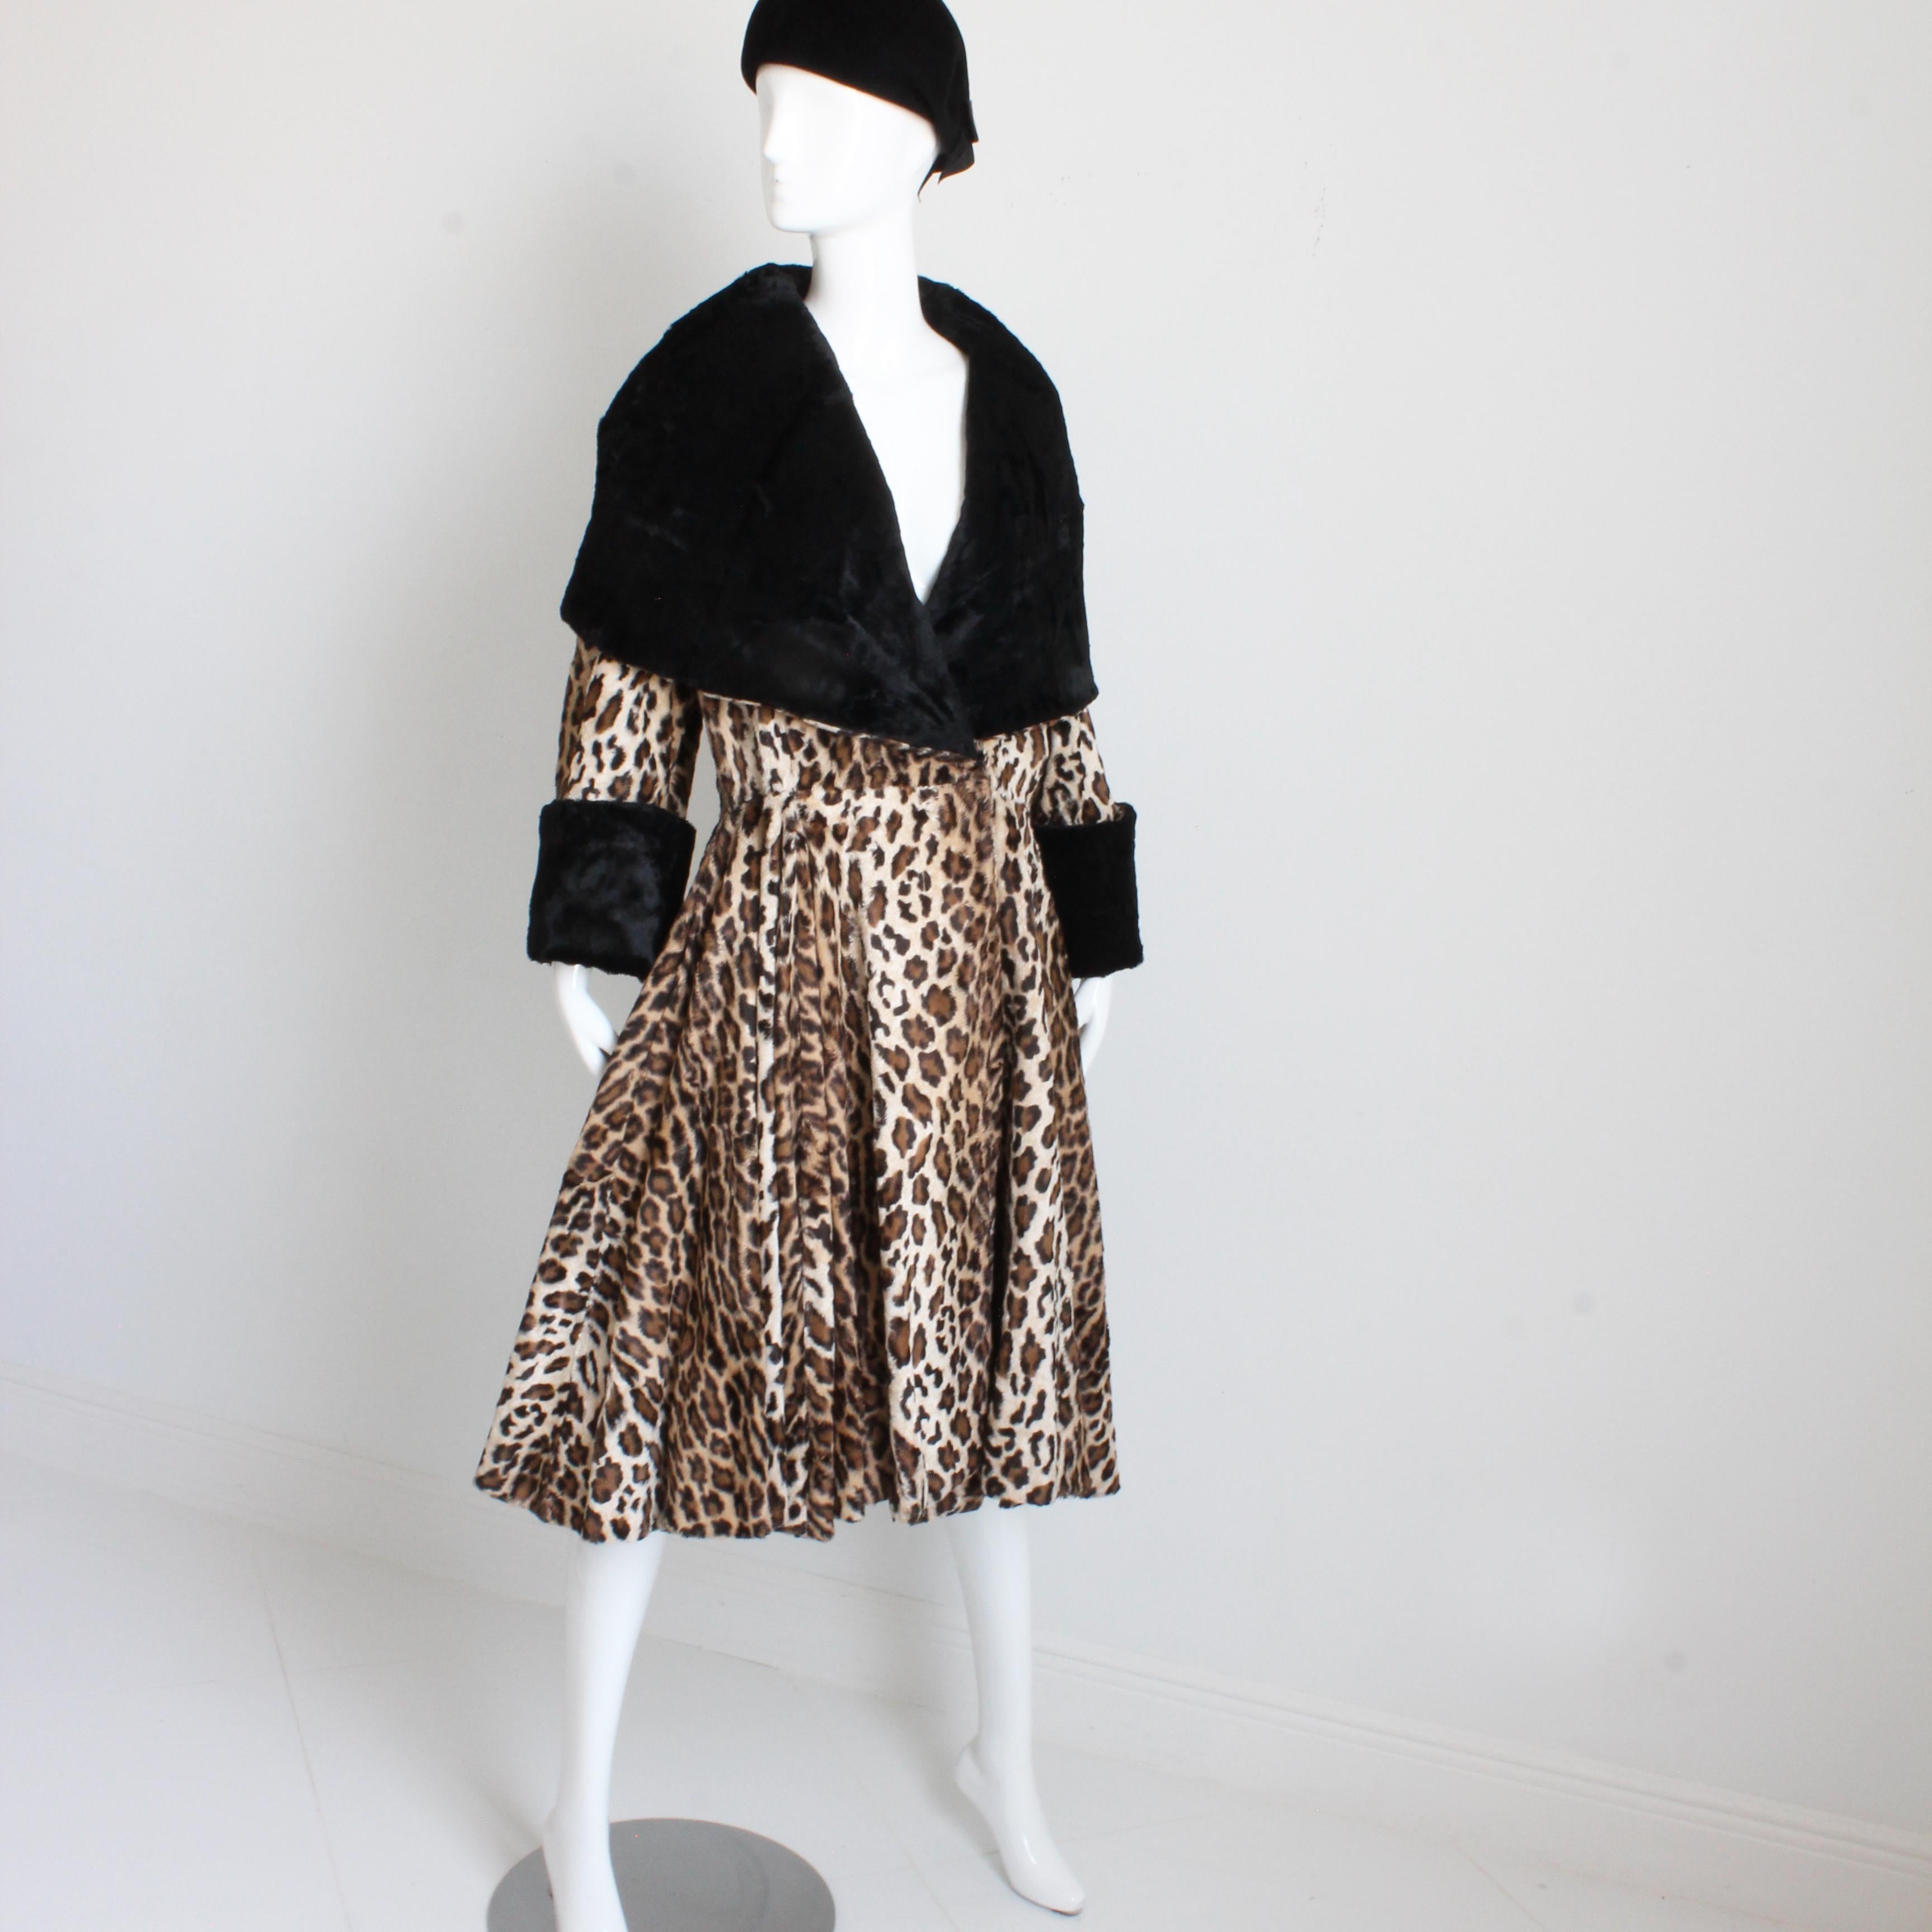 Norma Kamali OMO Coat Oversized Shawl Collar Faux Leopard Fur Vintage 80s Rare L In Good Condition For Sale In Port Saint Lucie, FL